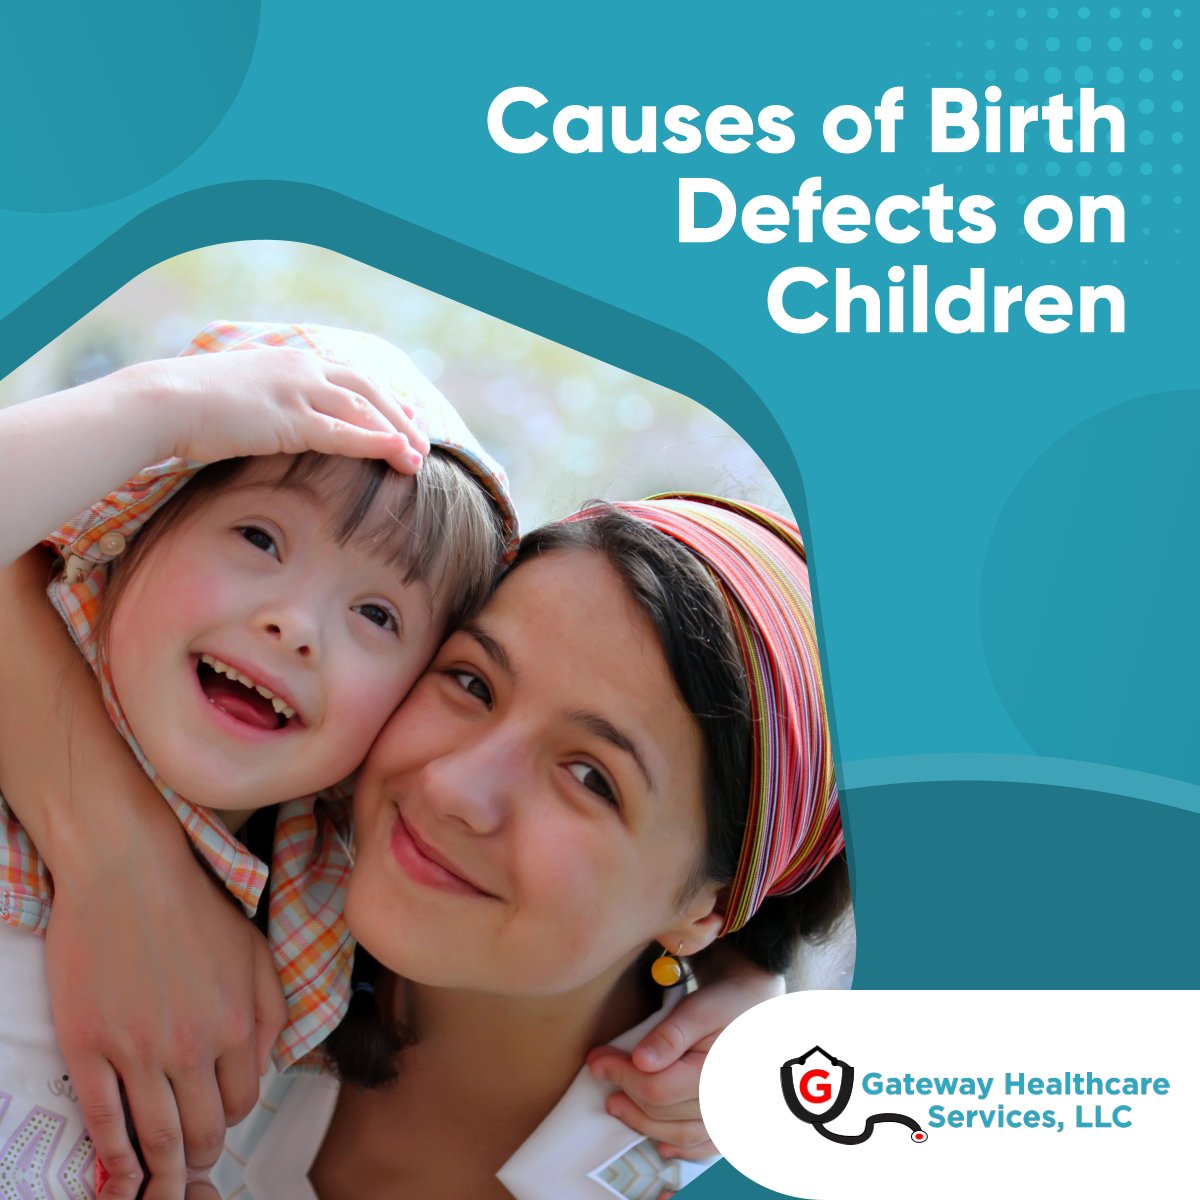 Deformities are common causes of death in infants. Causes of deformities include:

- Genetic issues
- Problems with chromosomes
- Environmental factors
- Toxic habits of the parent

Read more: facebook.com/photo.php?fbid…

#FairfaxVA #HealthcareServices #BirthDefects #DeformityCauses